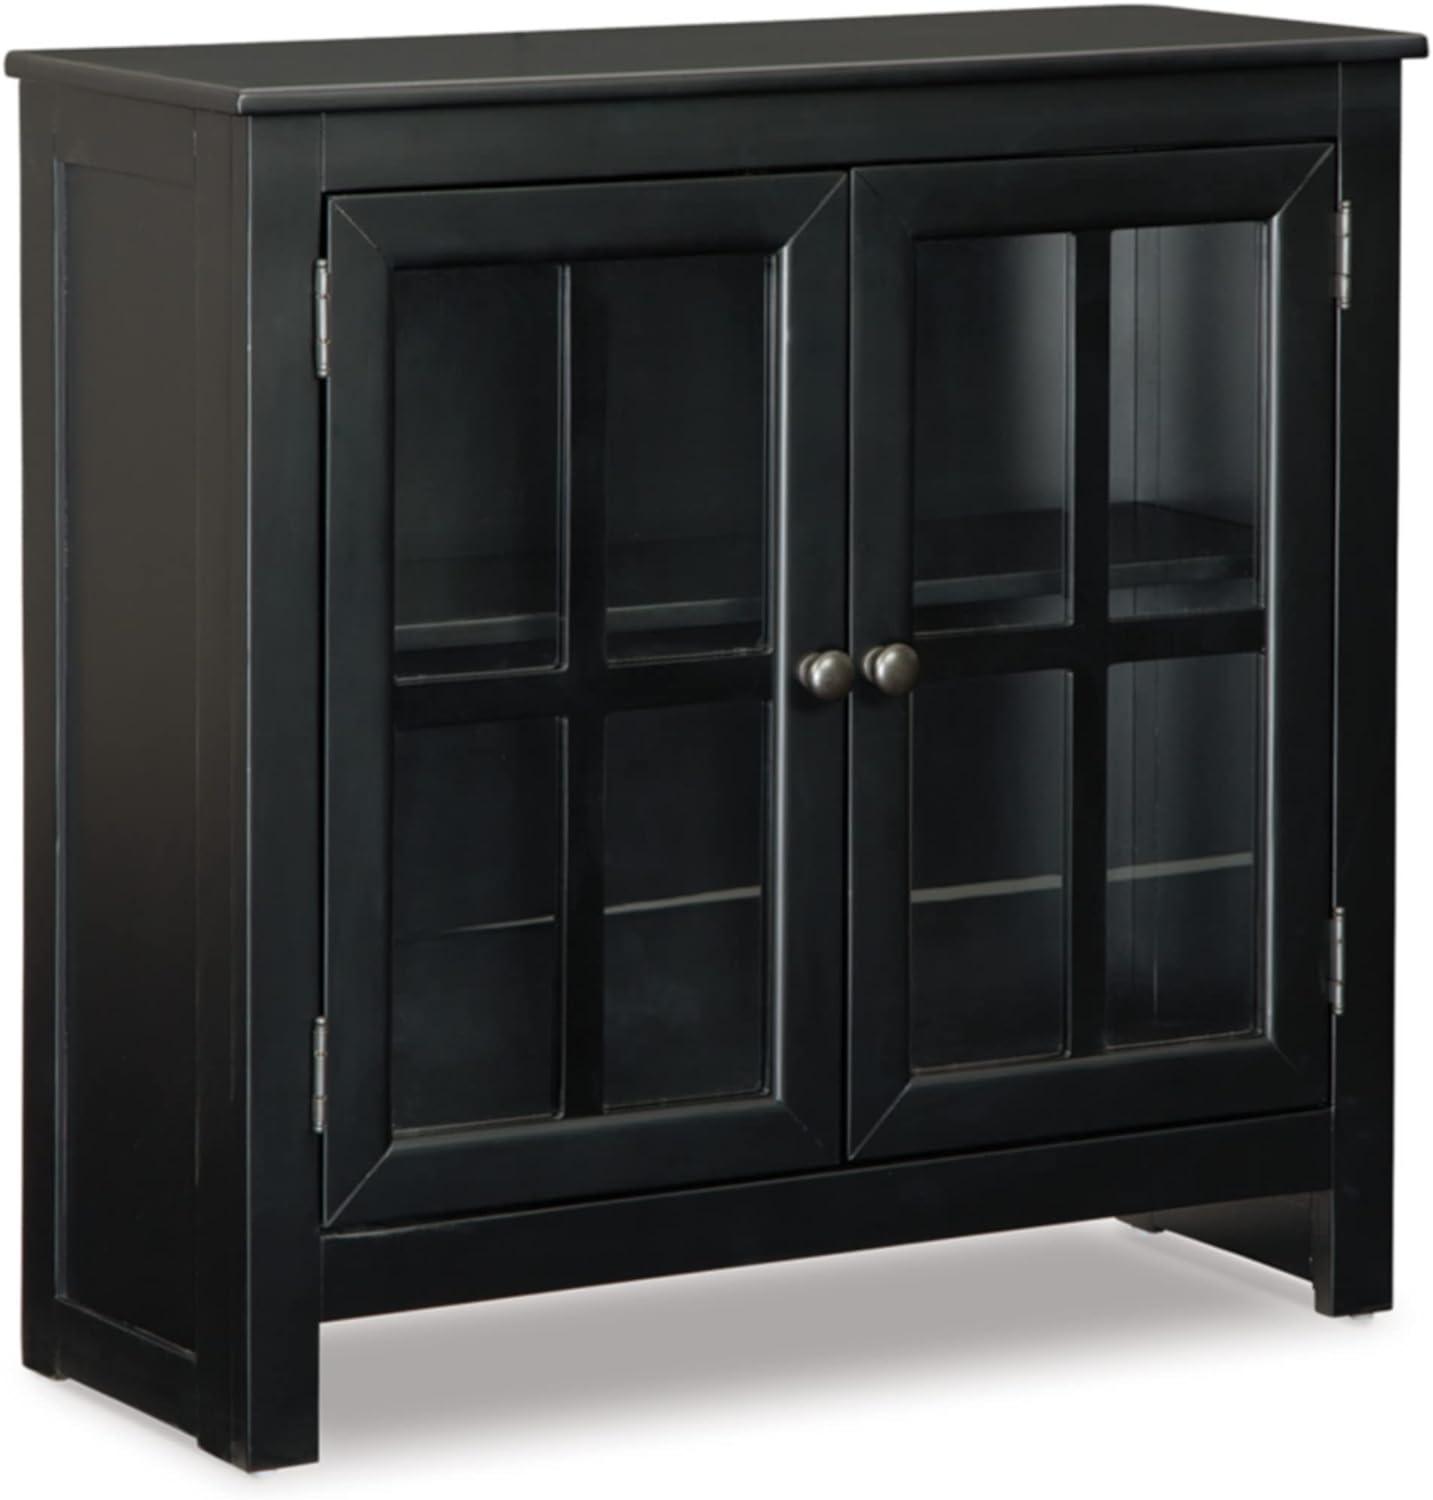 Transitional Black Wood Accent Cabinet with Lattice Doors and Adjustable Shelving